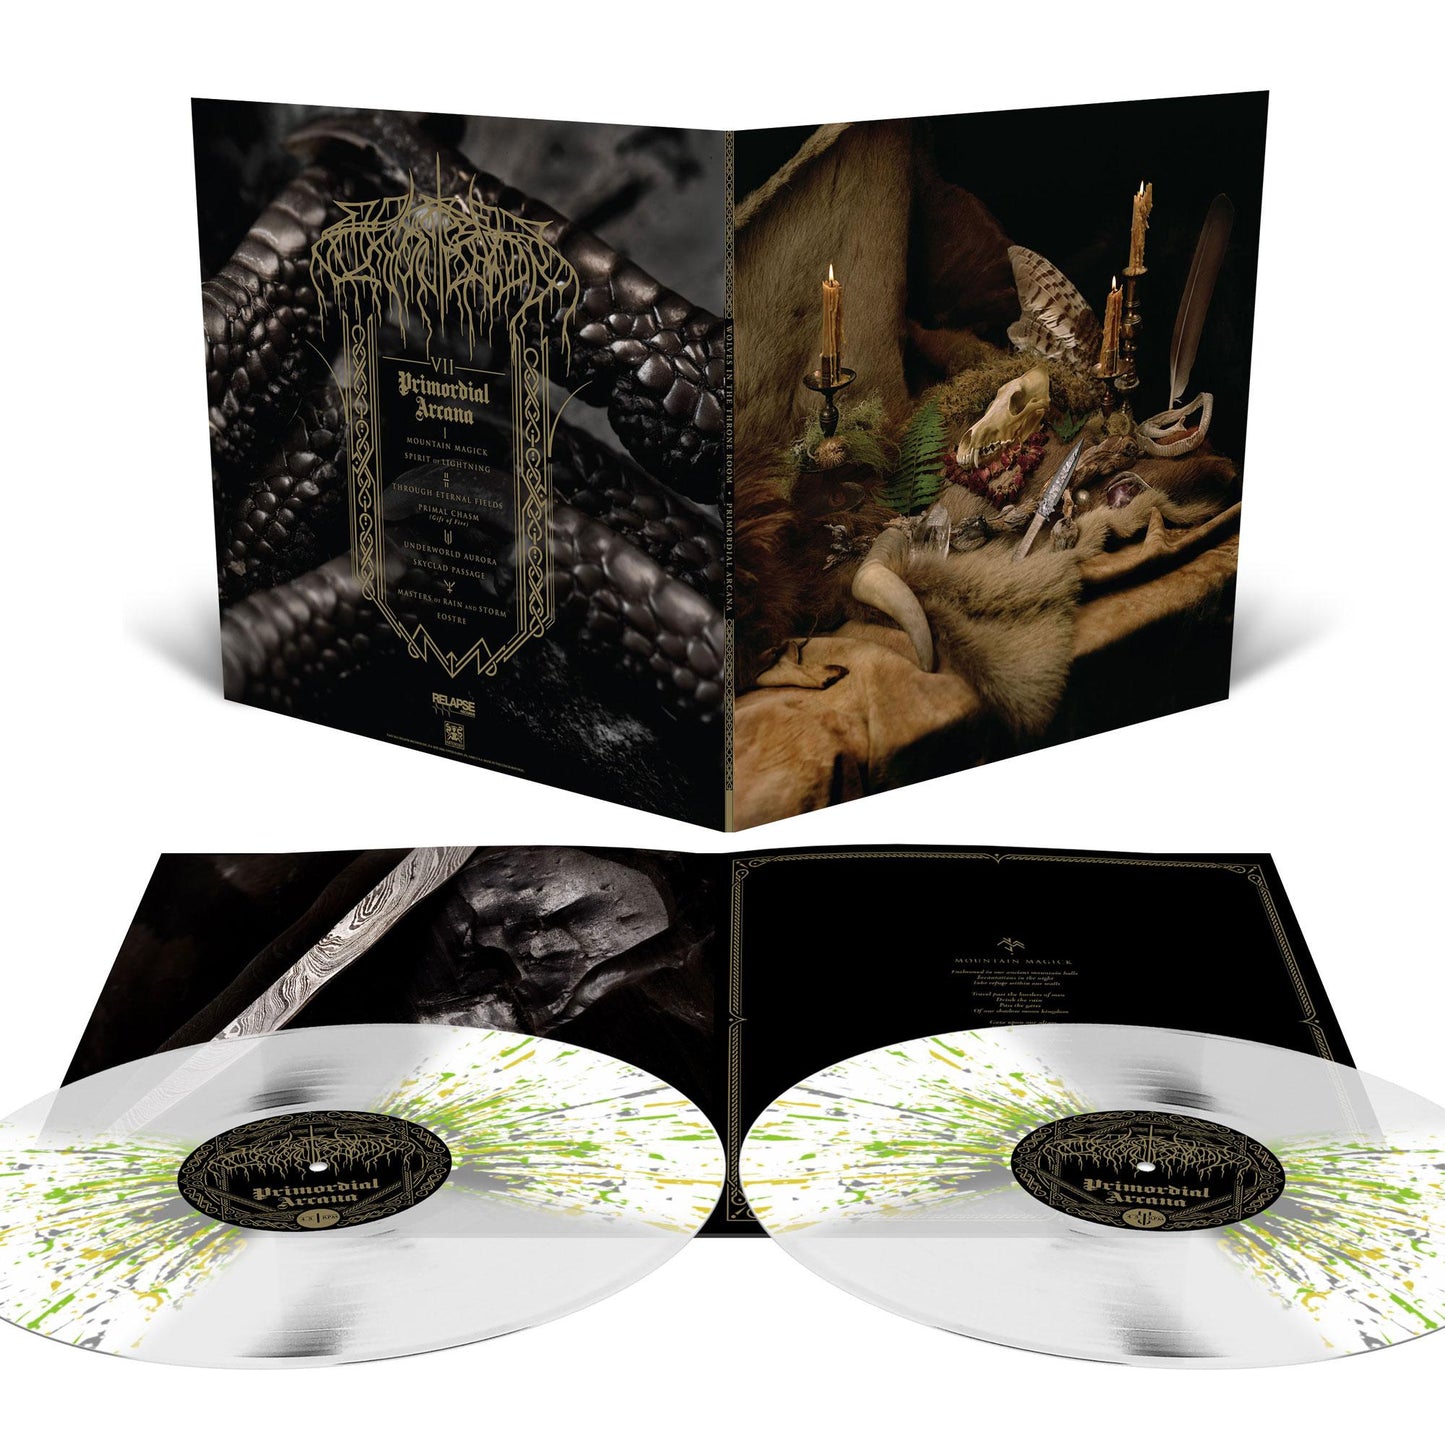 Wolves in the Throne Room - Primordial Arcana Deluxe 2xLP (color vinyl)